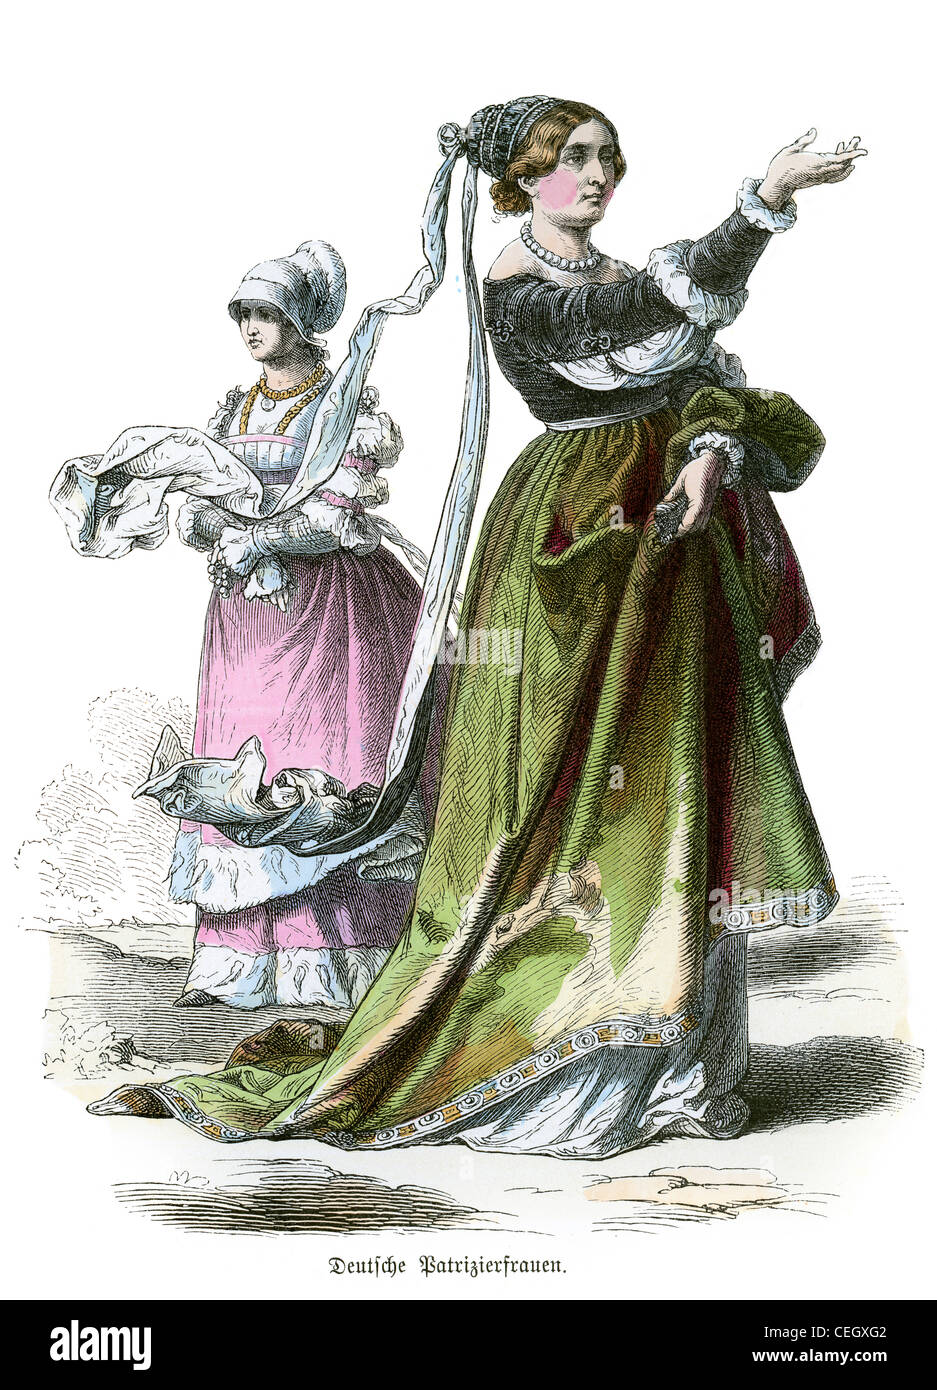 A couple of german patrician women in period fashion from the 16th century Stock Photo